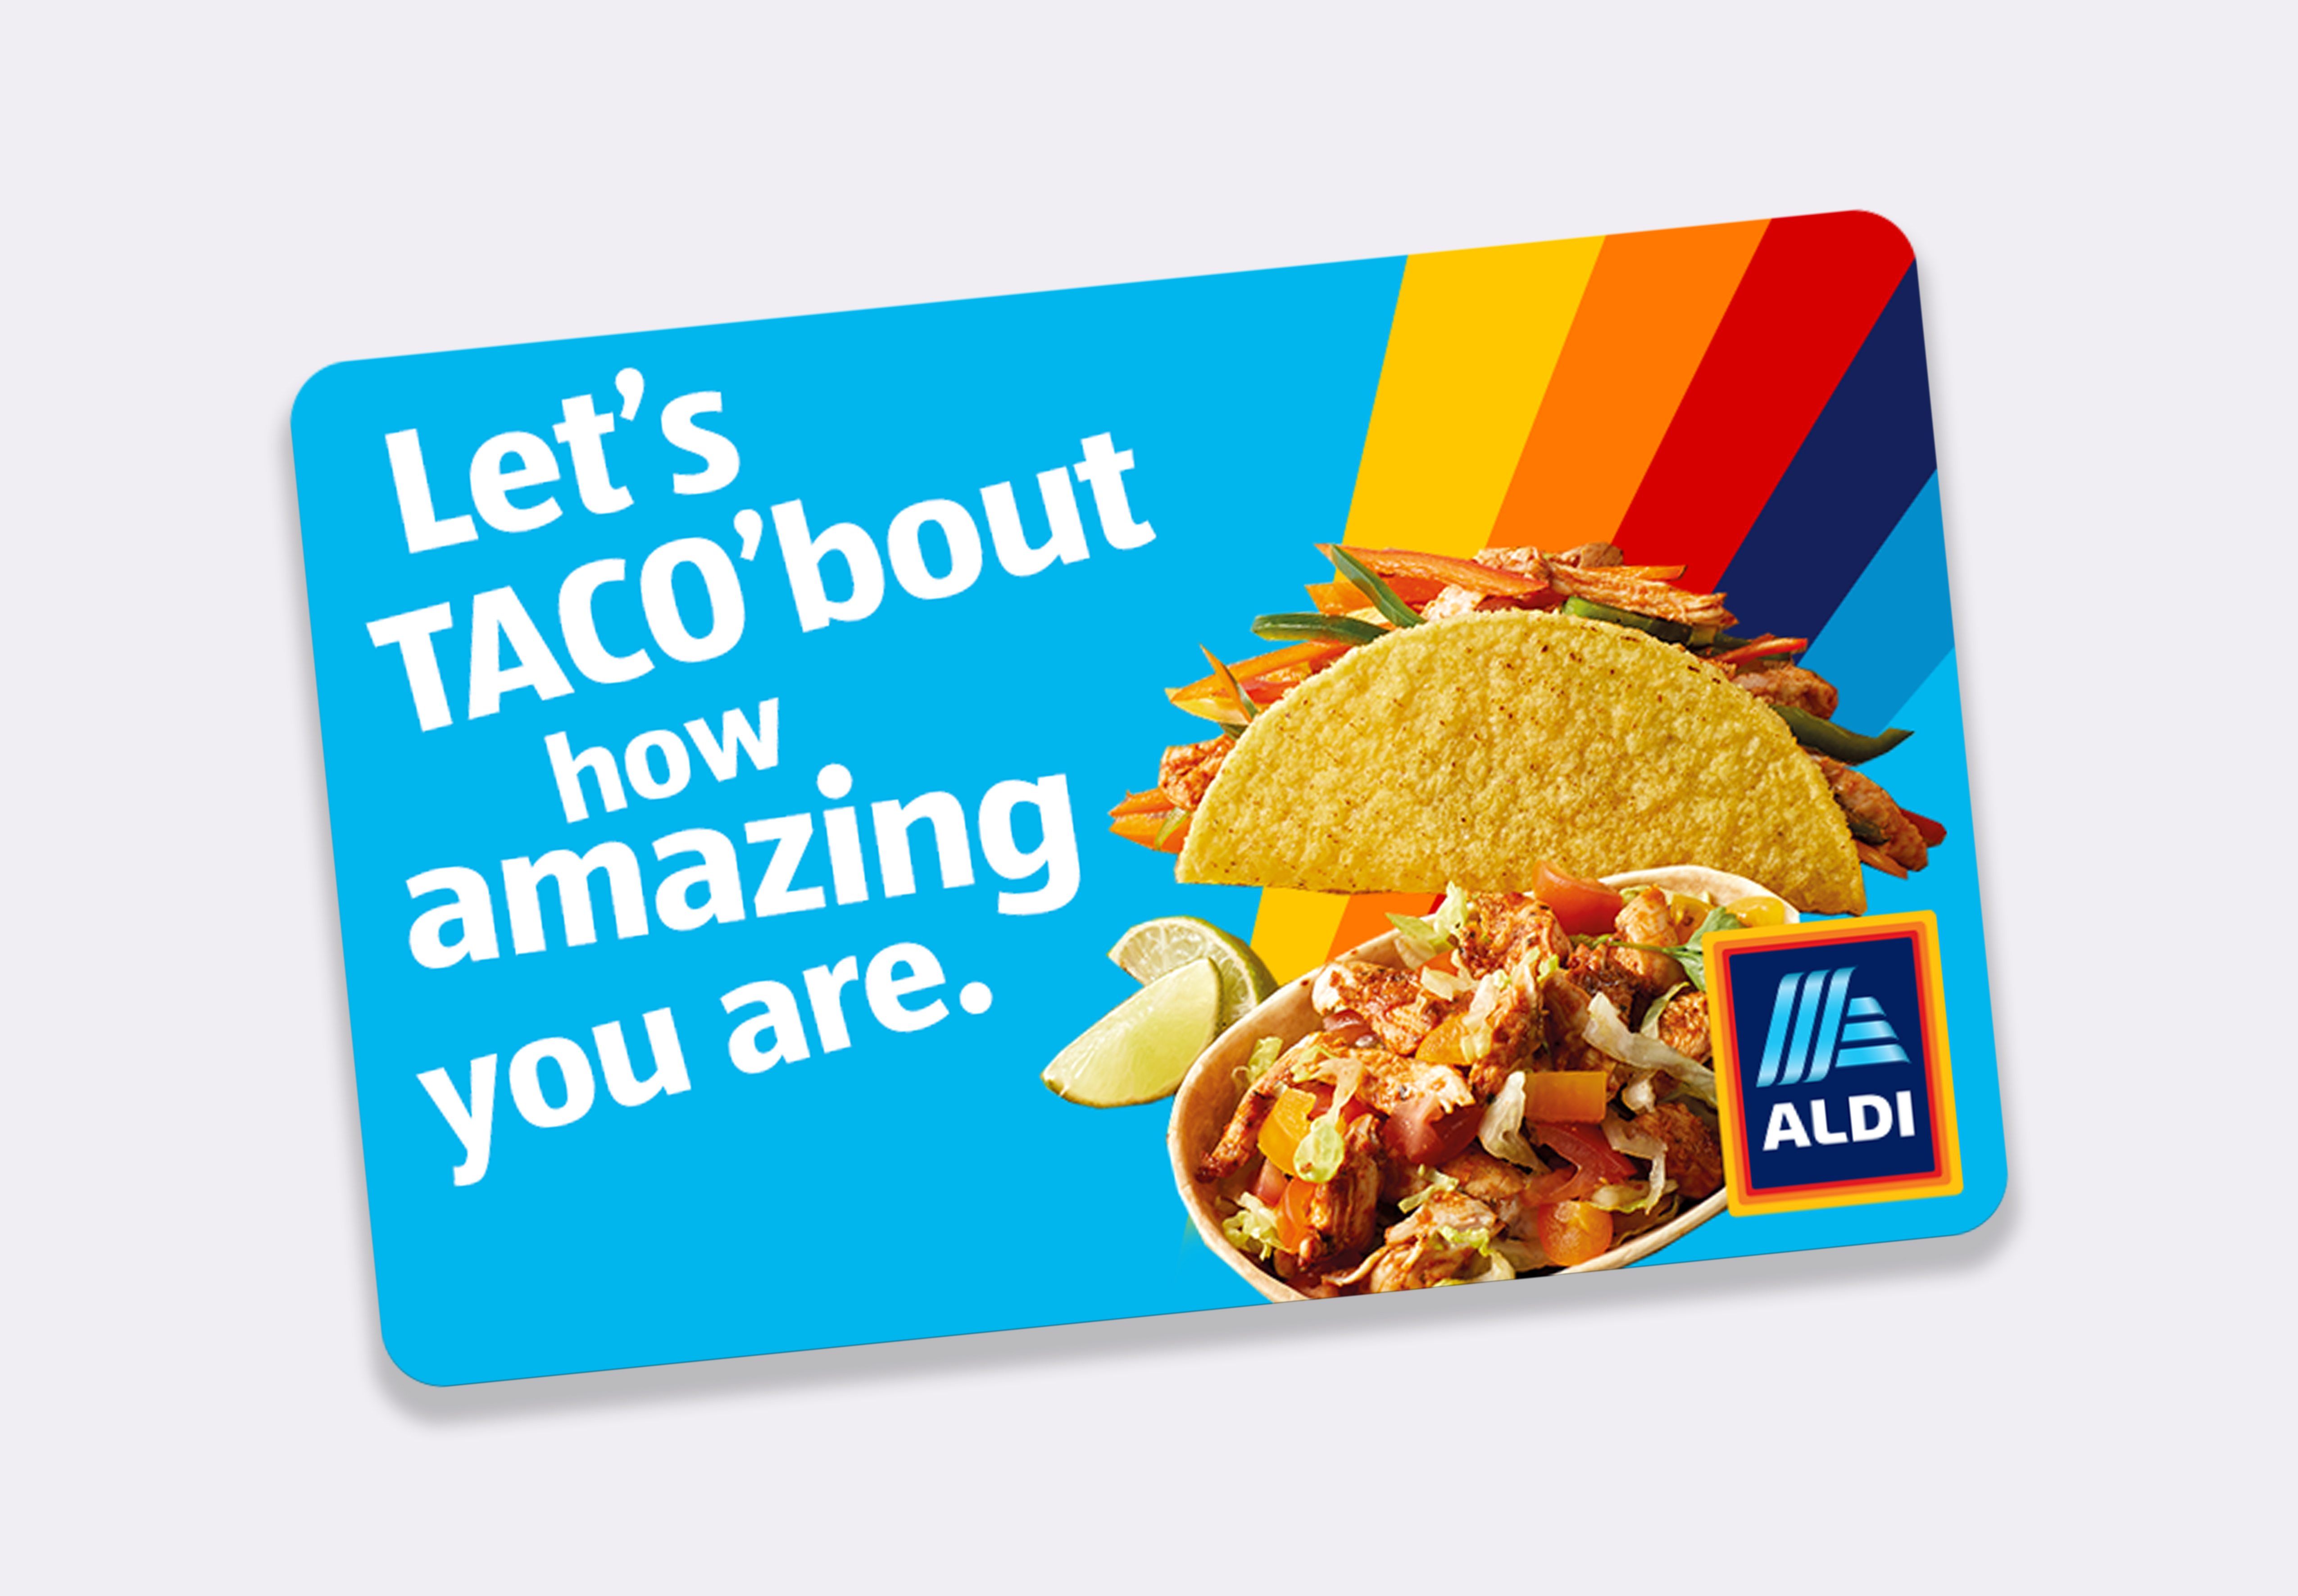 ALDI. Let's Taco'bout how amazing you are.